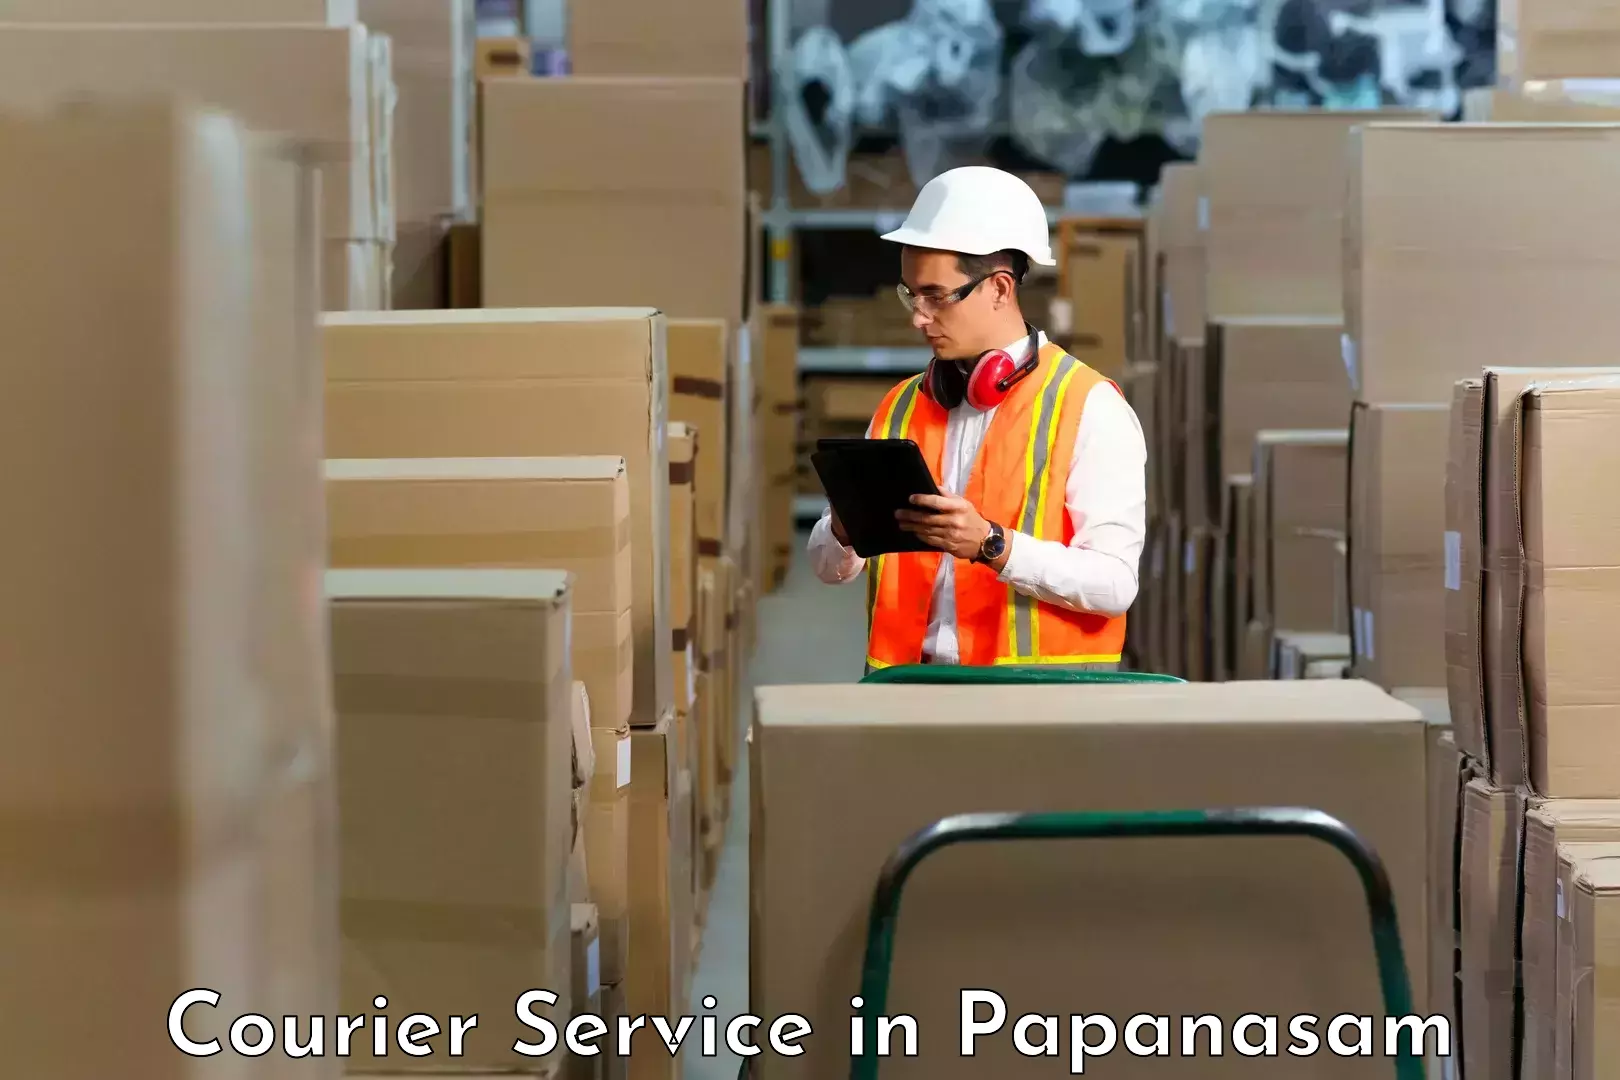 Tech-enabled shipping in Papanasam